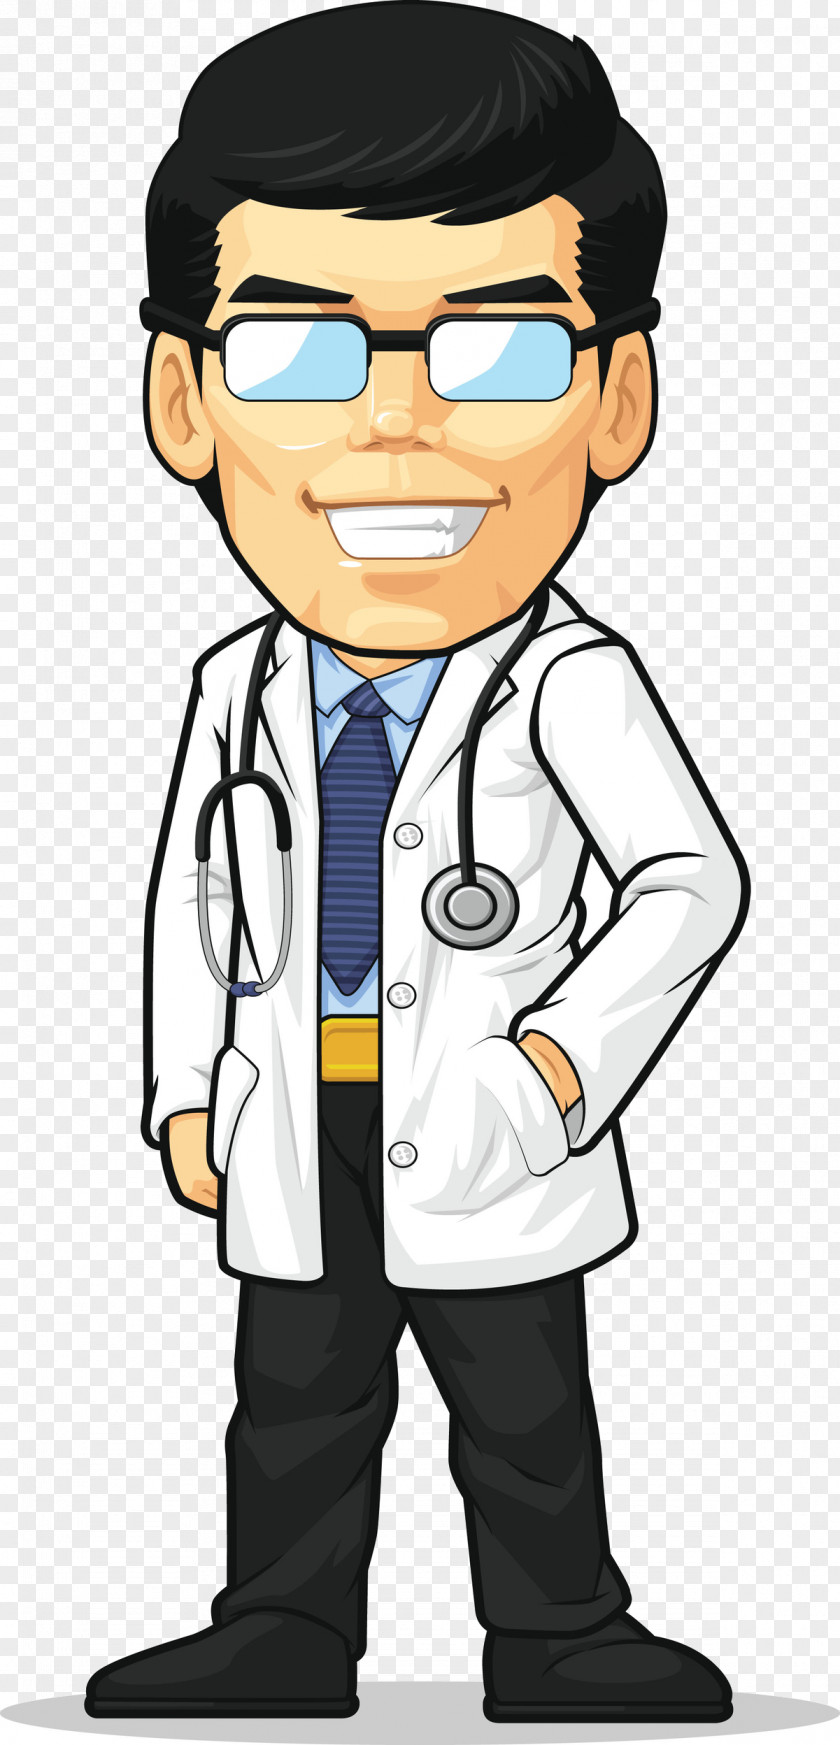 Doctor Cartoon Physician Drawing Royalty-free PNG